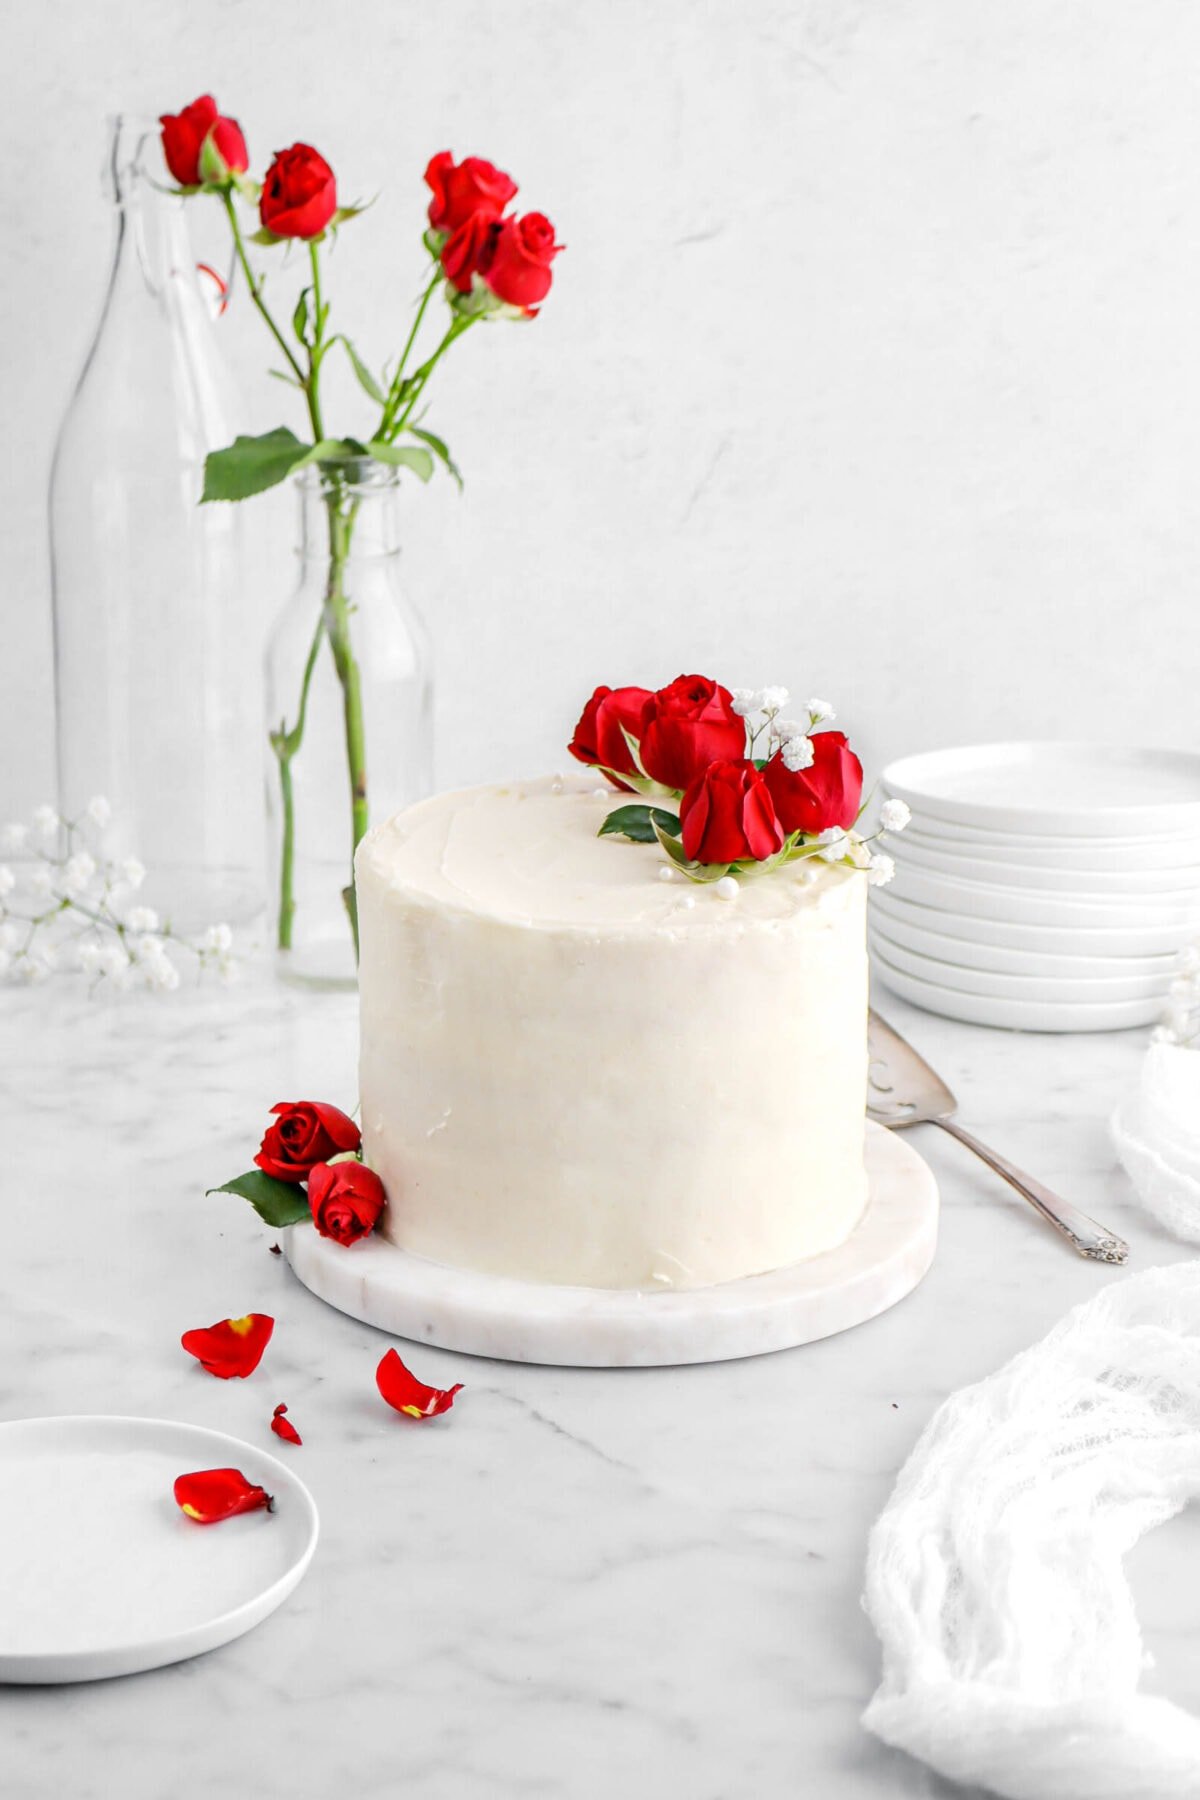 cake on marble board with red roses, small white flowers, and white pearl sugar on top of cake with a plate and rose petals beside, roses behind in glass, and a white cheesecloth beside.